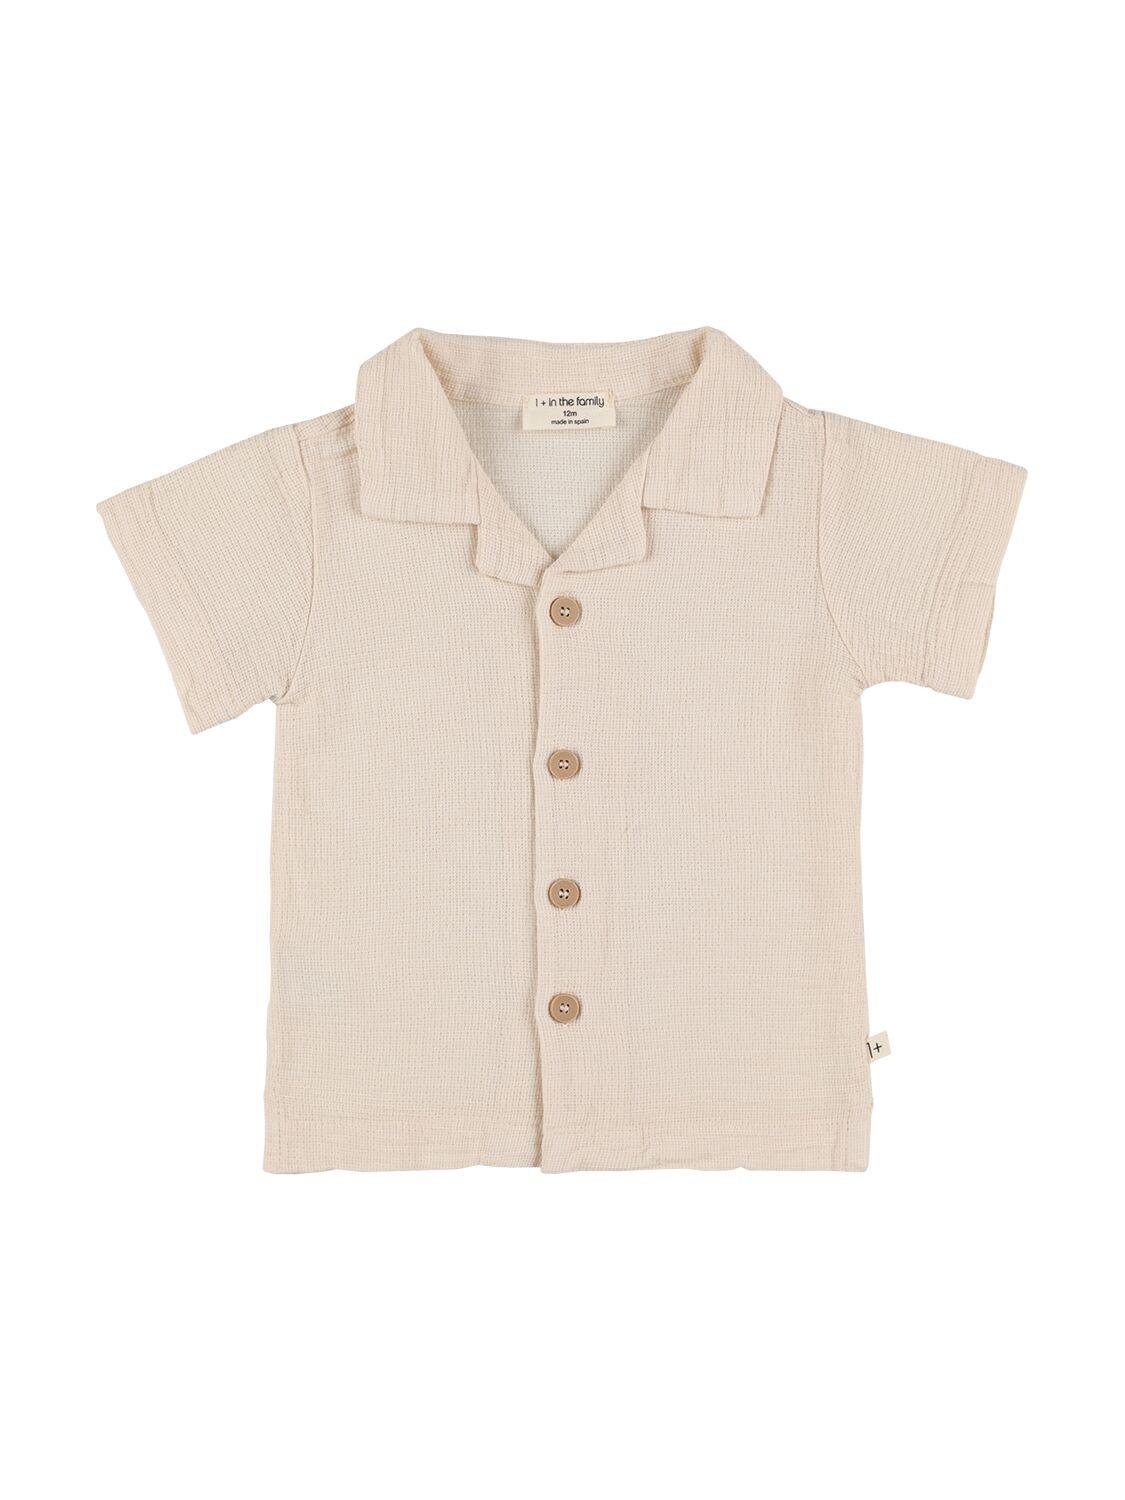 Cotton Shirt by 1 + IN THE FAMILY